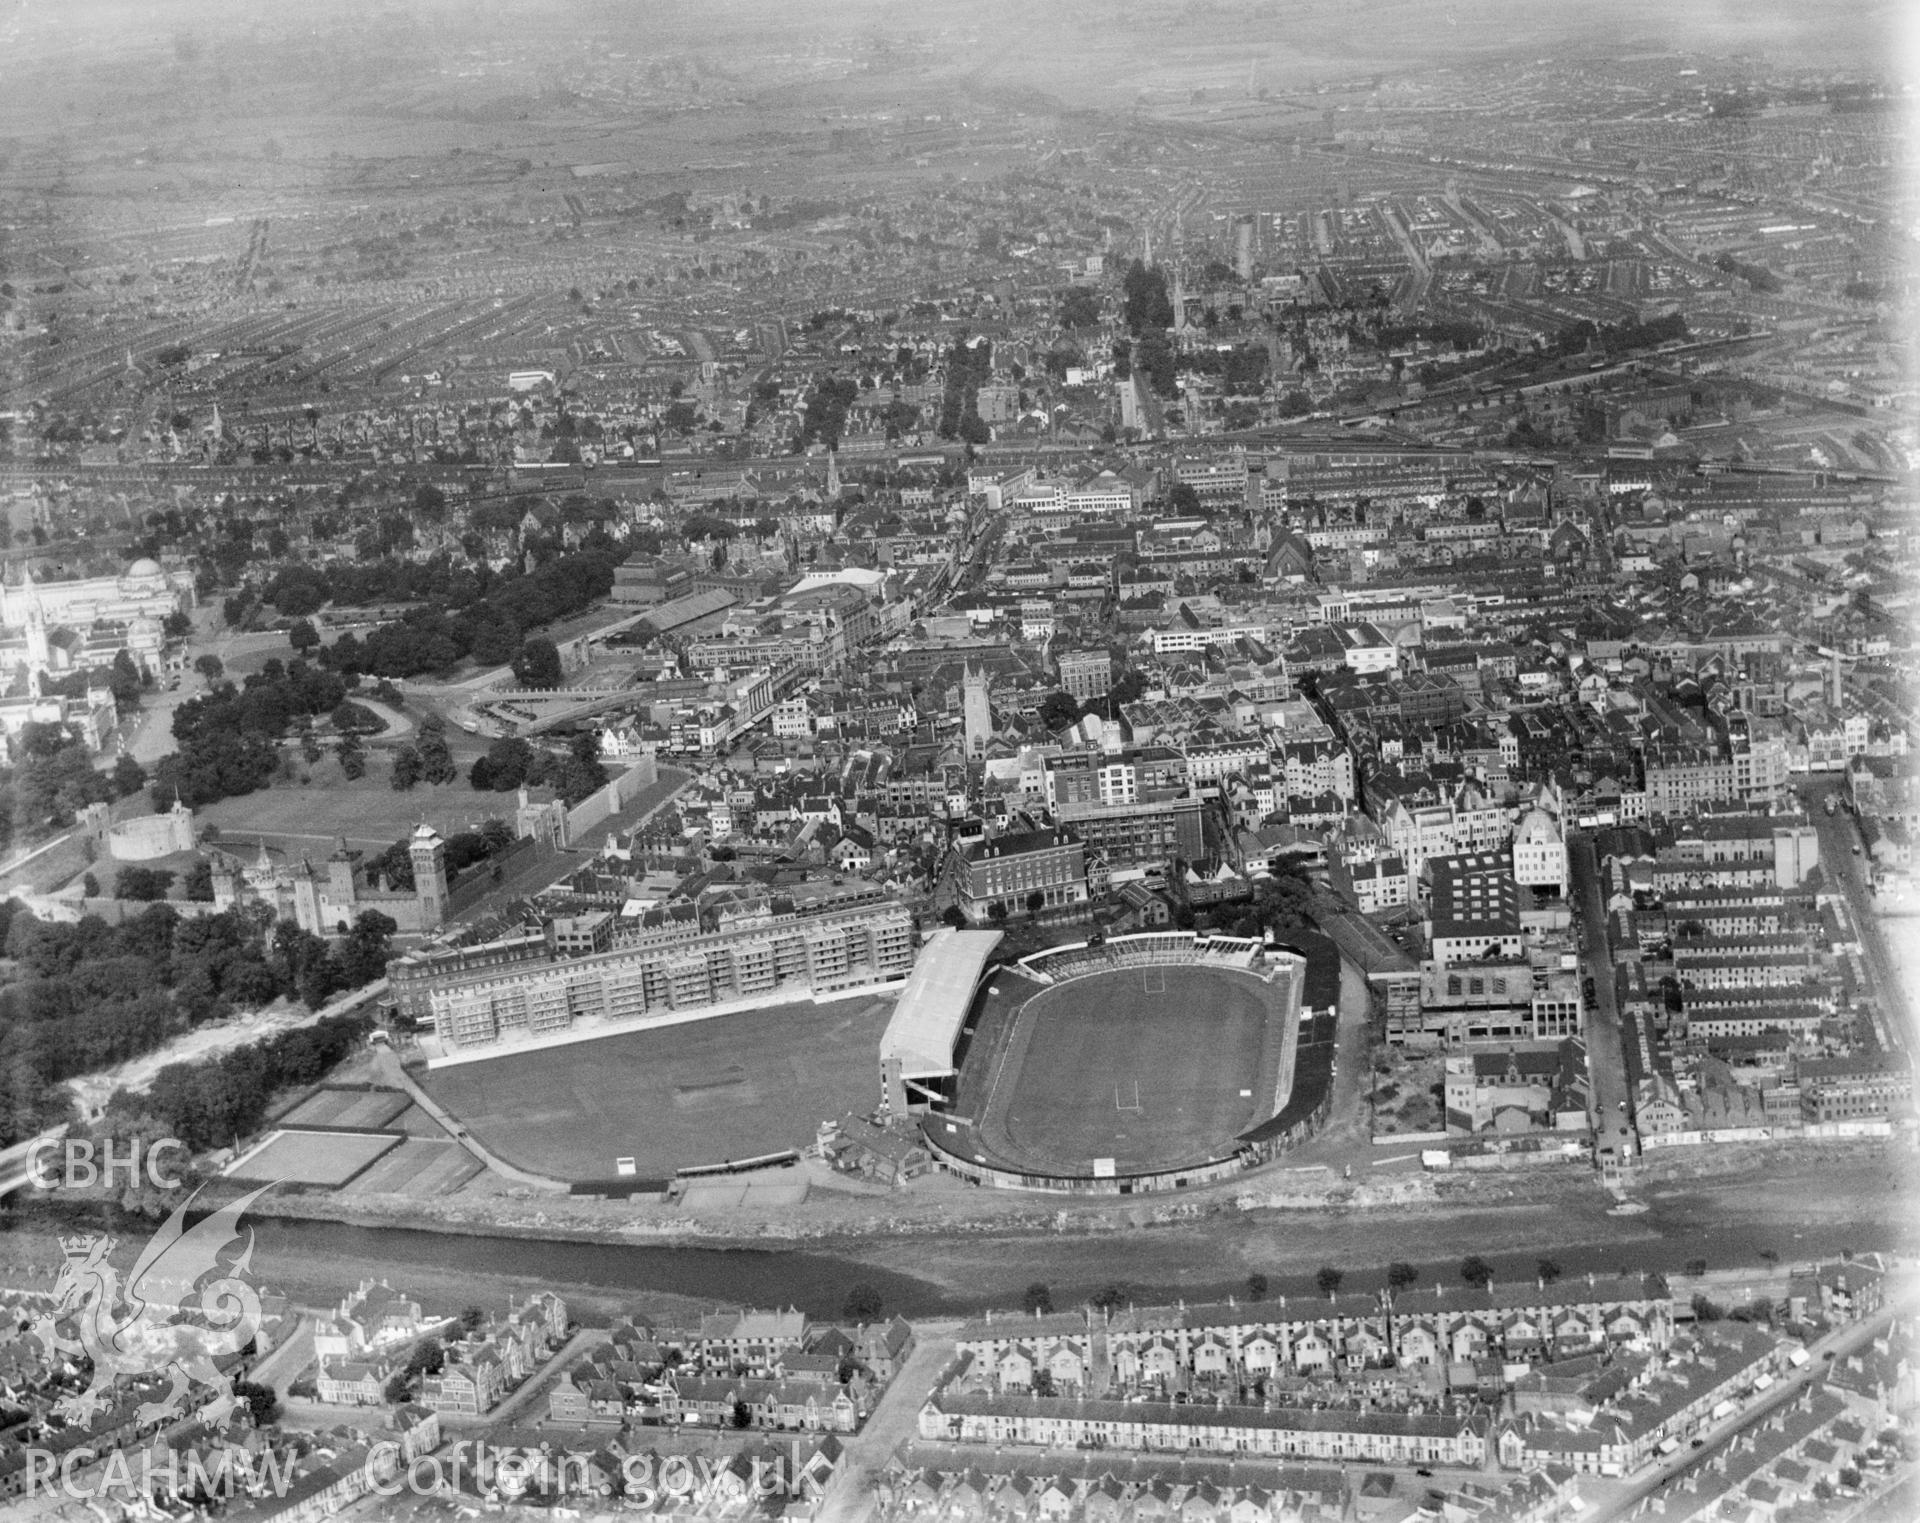 View of central Cardiff showing Cardiff Arms Park, oblique aerial view. 5?x4? black and white glass plate negative.